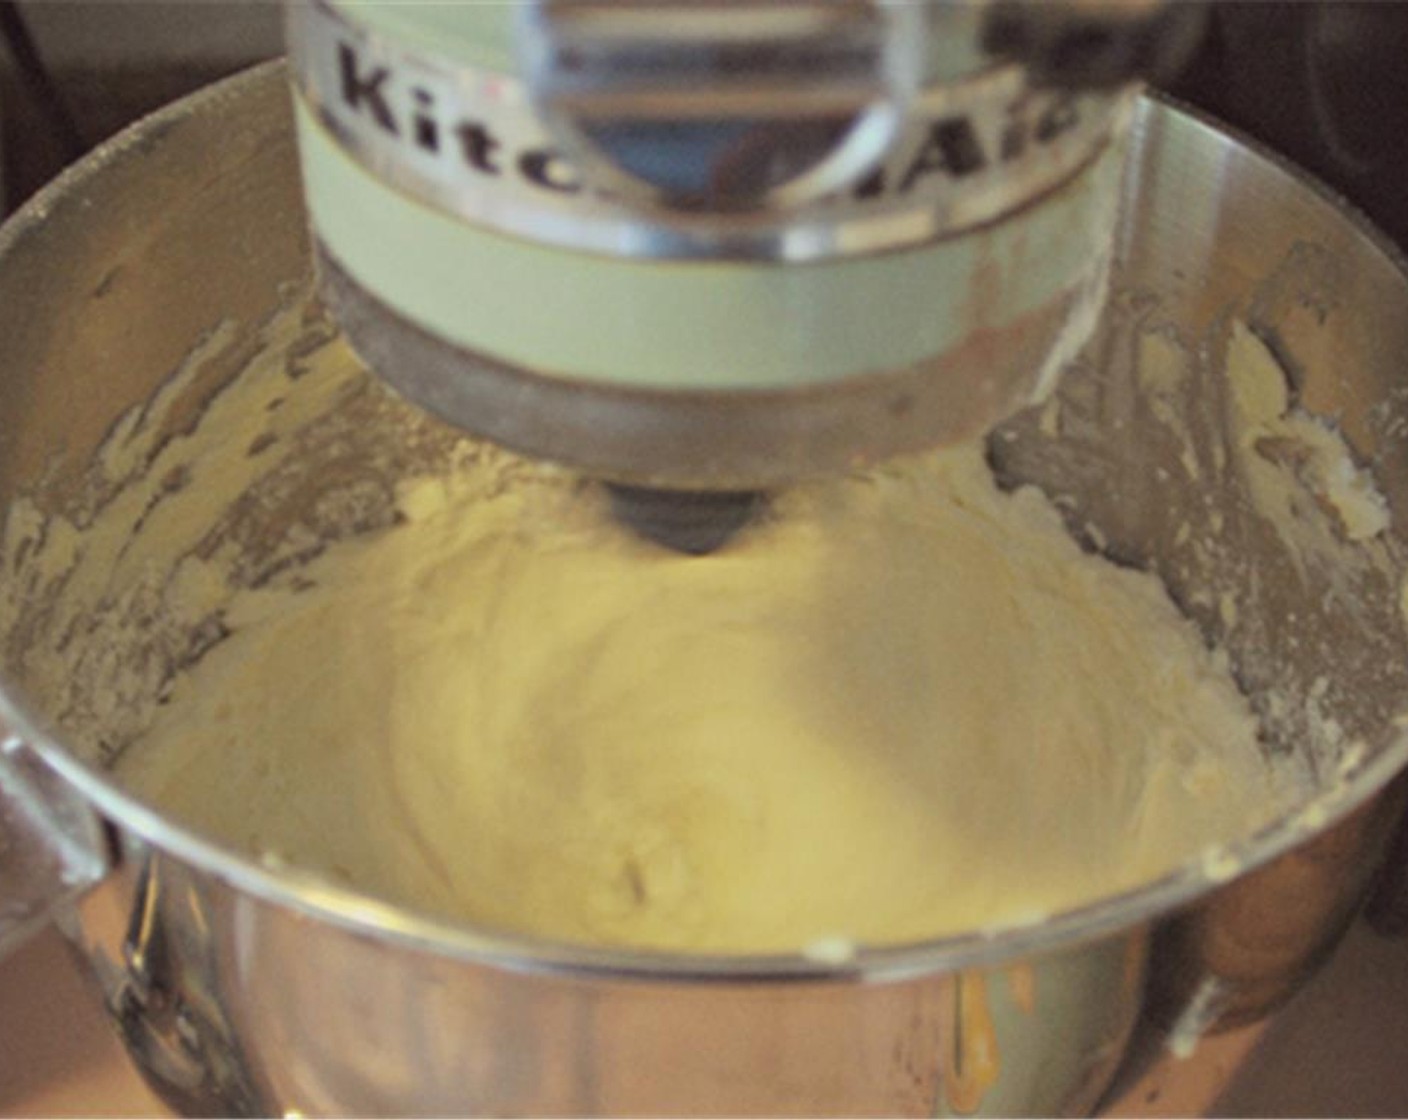 step 8 For frosting, beat softened vegan butter in the bowl of an electric stand mixer. Add Powdered Confectioners Sugar (3 1/2 cups) slowly and then mix on high for 3 minutes. Add Kahlua (1 Tbsp) and Coconut Milk (1/4 cup)